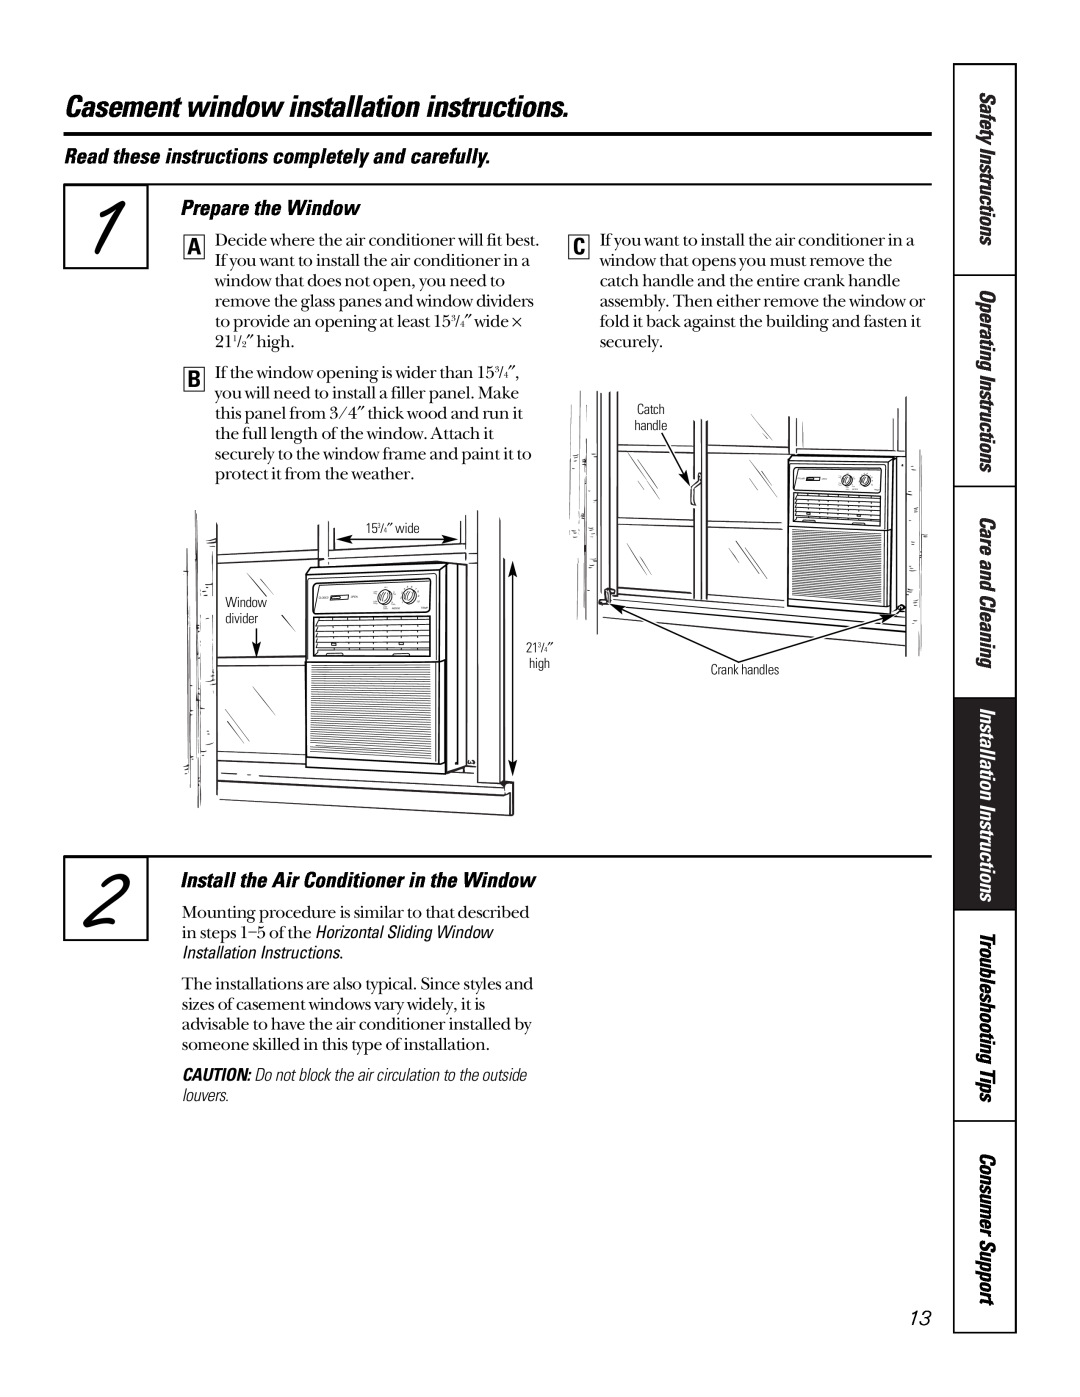 GE AVX07 Casement window installation instructions, Safety, Prepare the Window, Install the Air Conditioner in the Window 